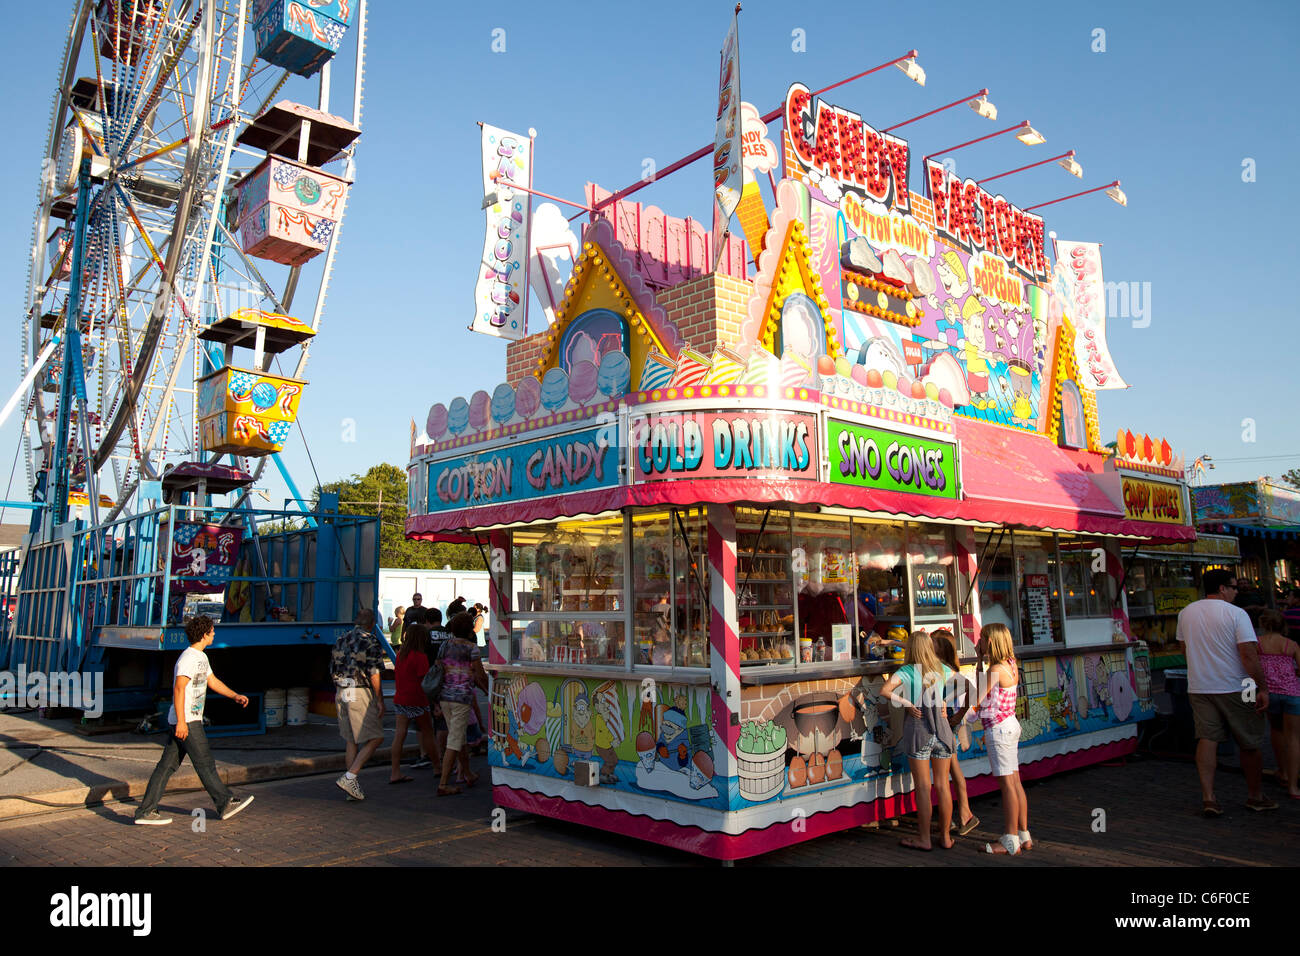 Children place their order at a food vendor stand during a carnival in Rogers, Arkansas. Stock Photo